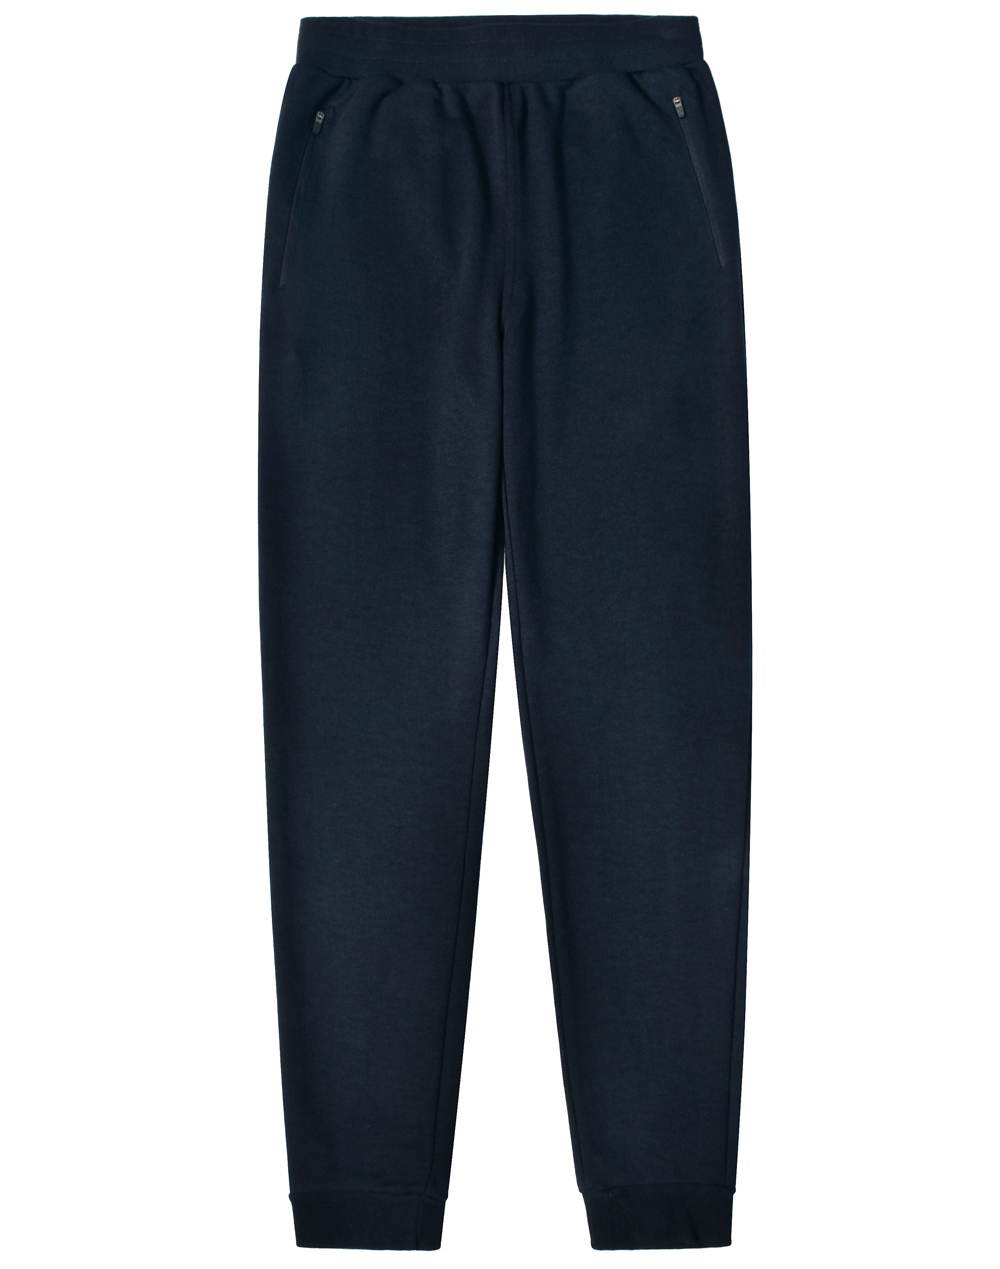 Adults French Terry Track Pants - Good Things Australia